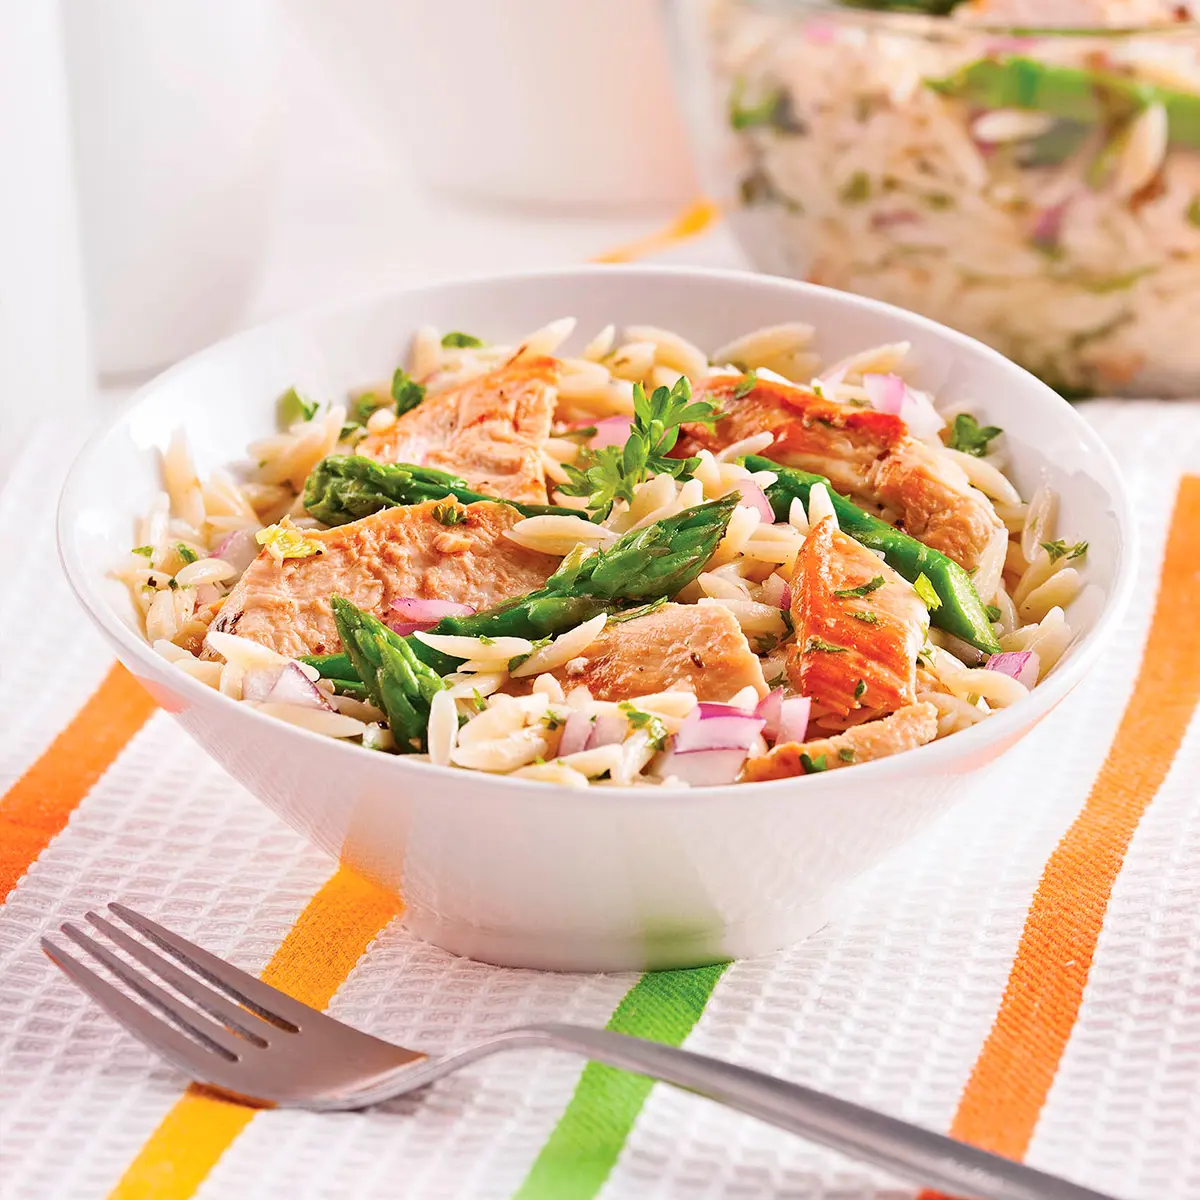 Orzo, asparagus and roasted chicken salad